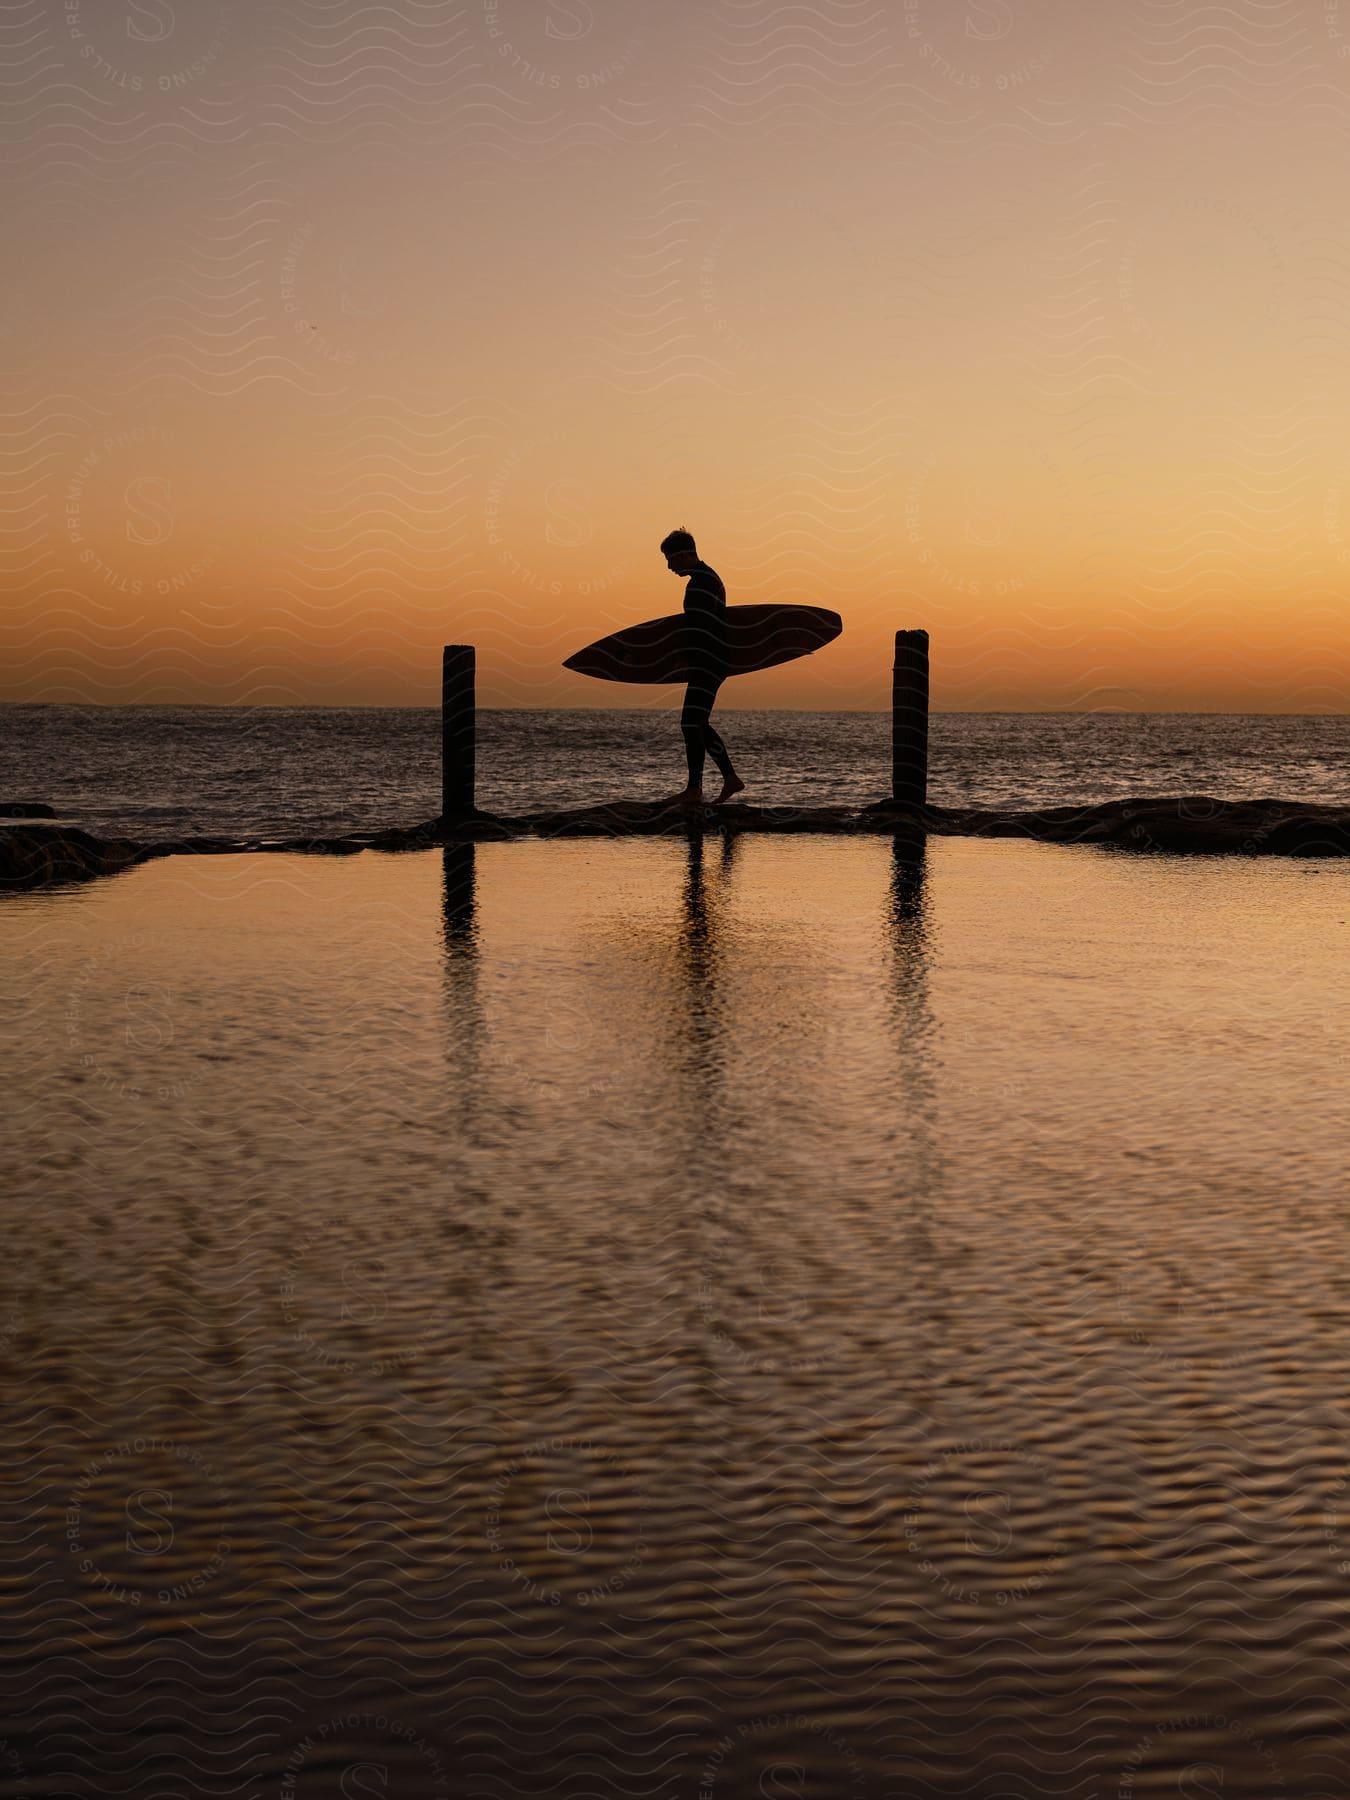 Man walking on the beach with a surfboard under his arm at sunset.